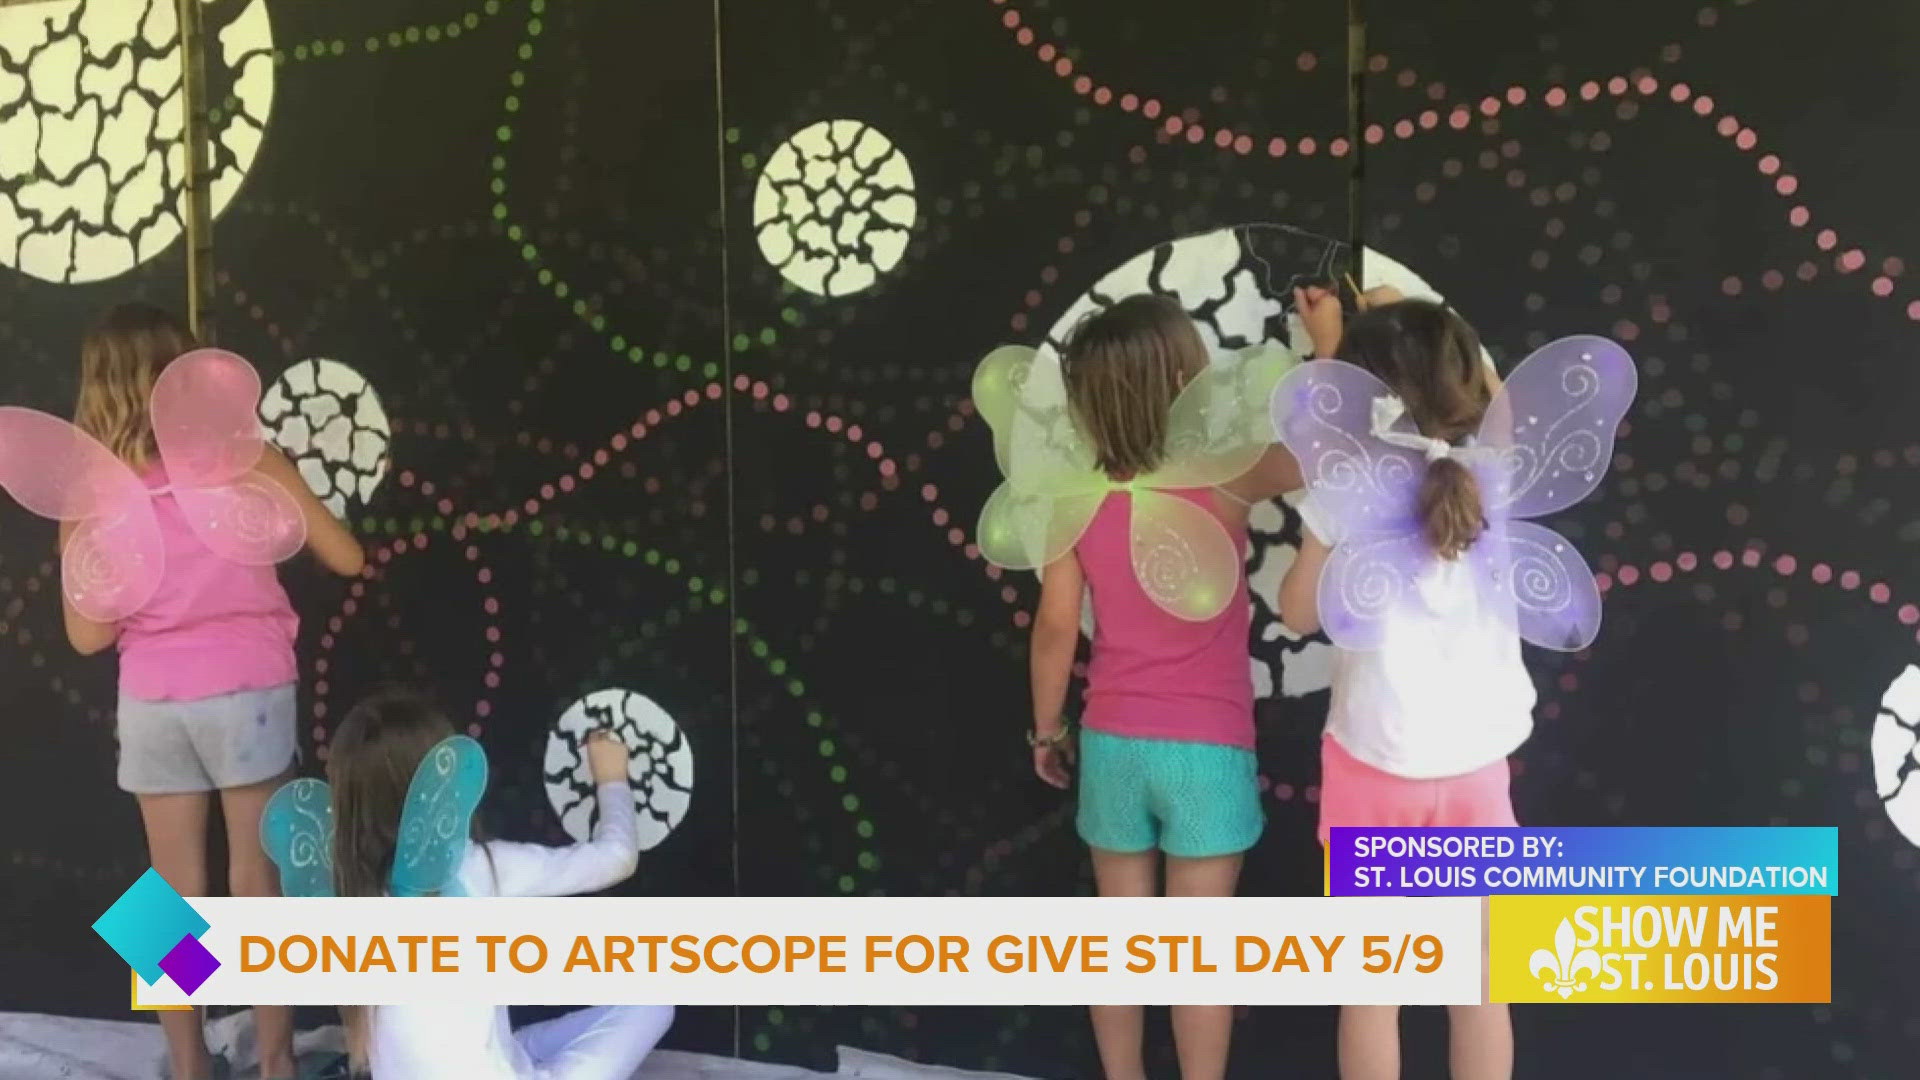 This Give STL day, consider supporting the mission of Artscope. A nonprofit who helps local kids and adults find meaning behind the paintbrush.